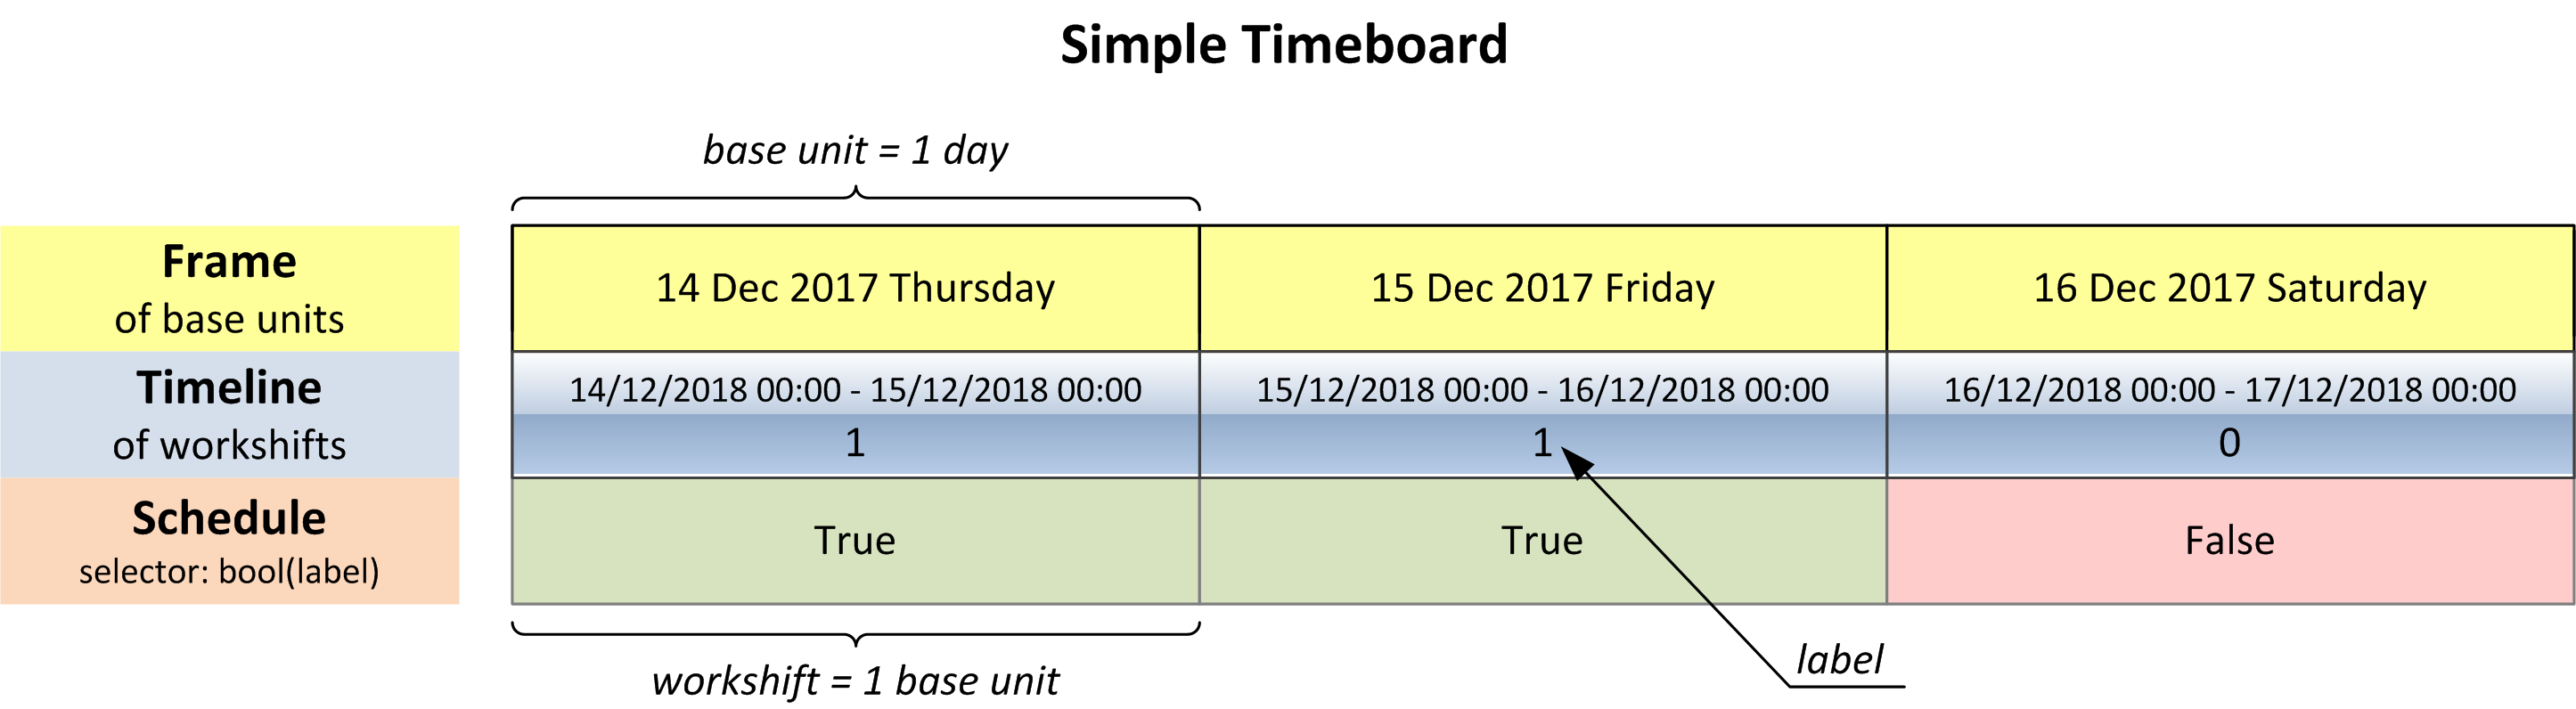 _images/simple_timeboard.png